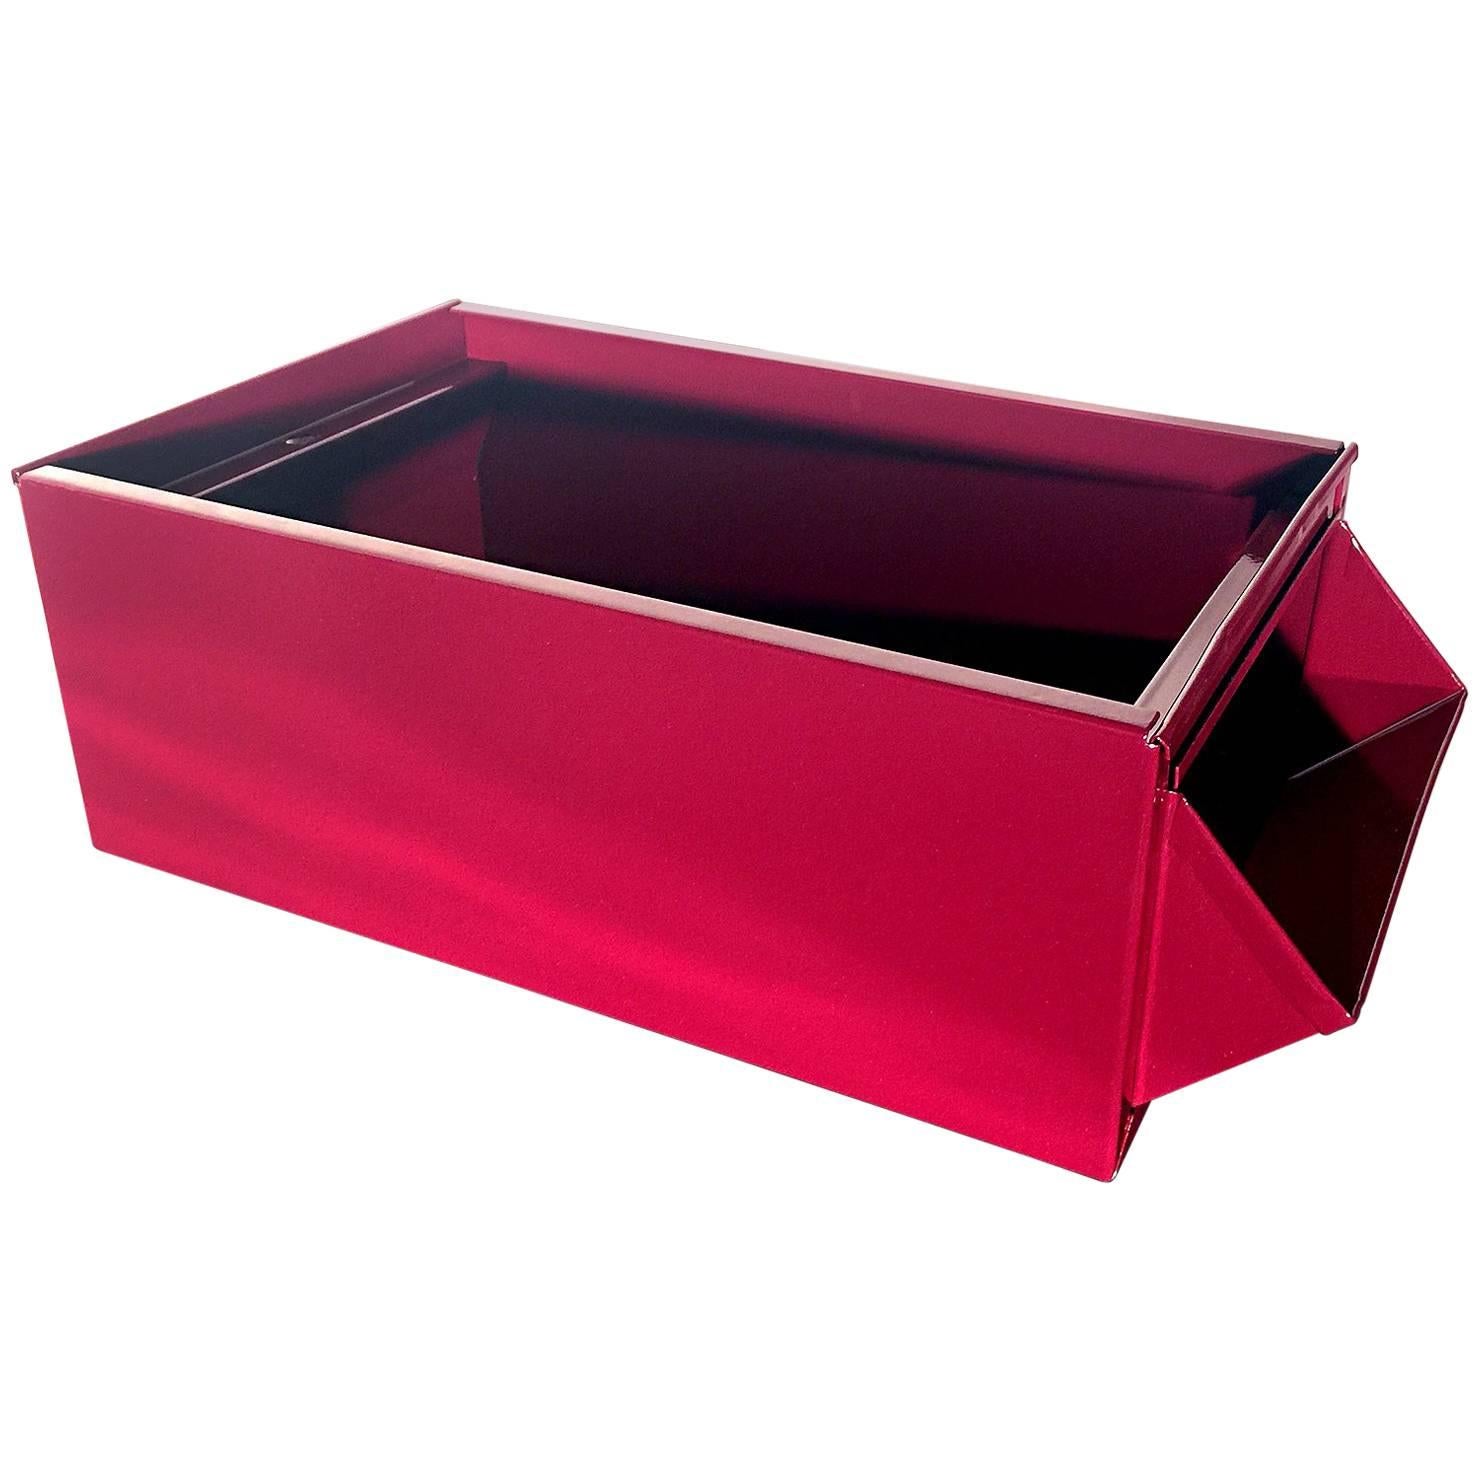 1940s Industrial Storage Bin, Refinished in Red